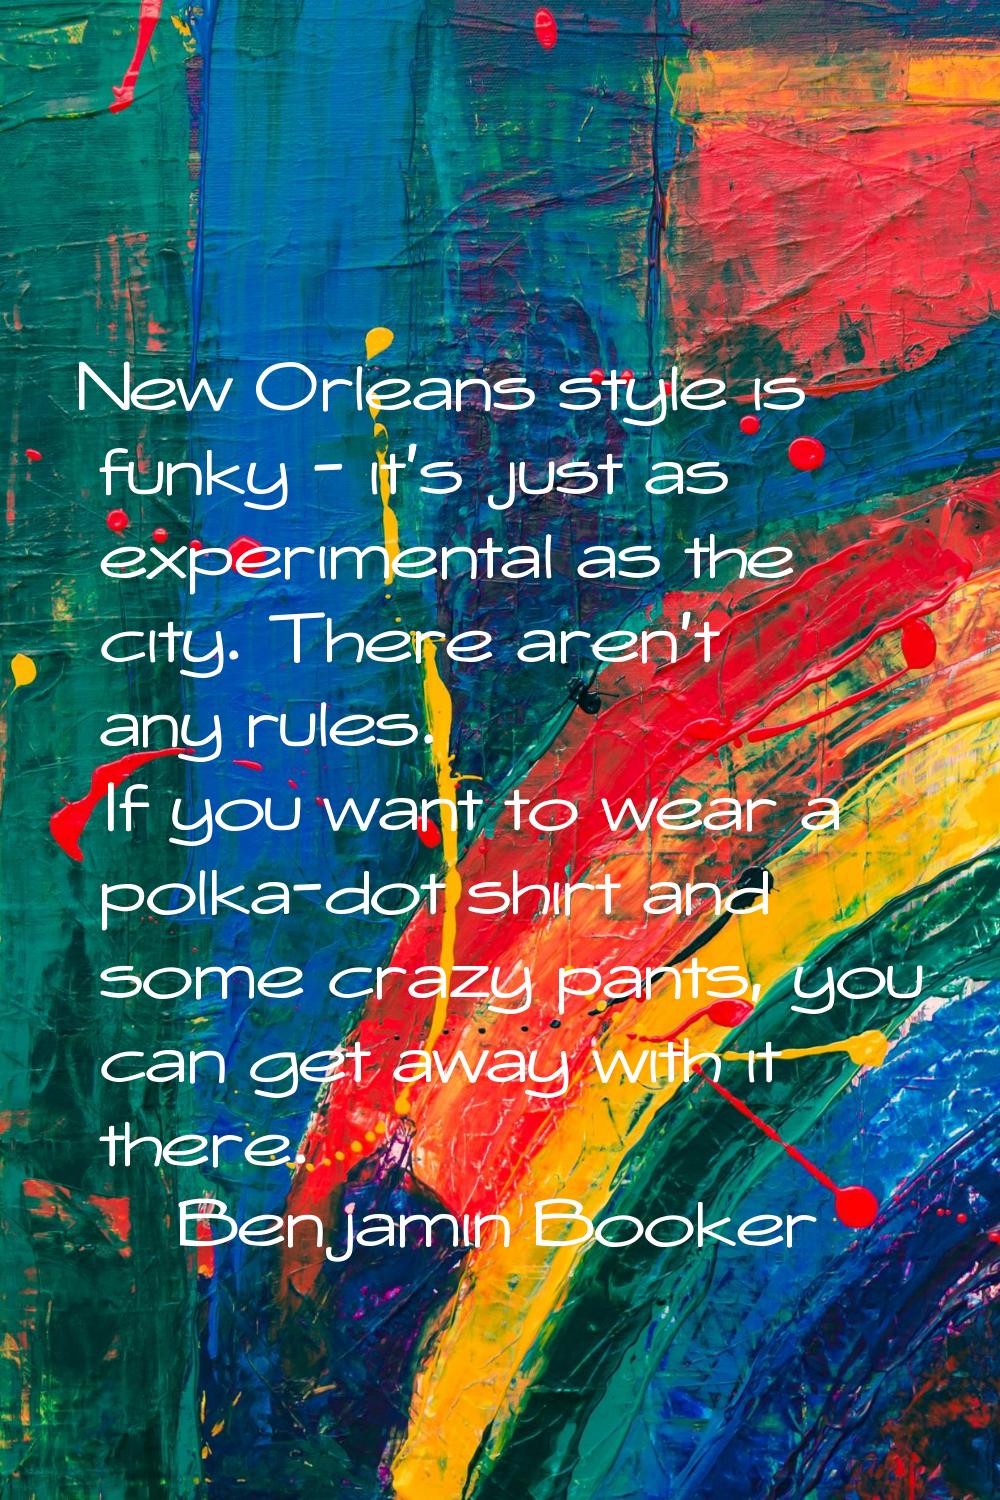 New Orleans style is funky - it's just as experimental as the city. There aren't any rules. If you 